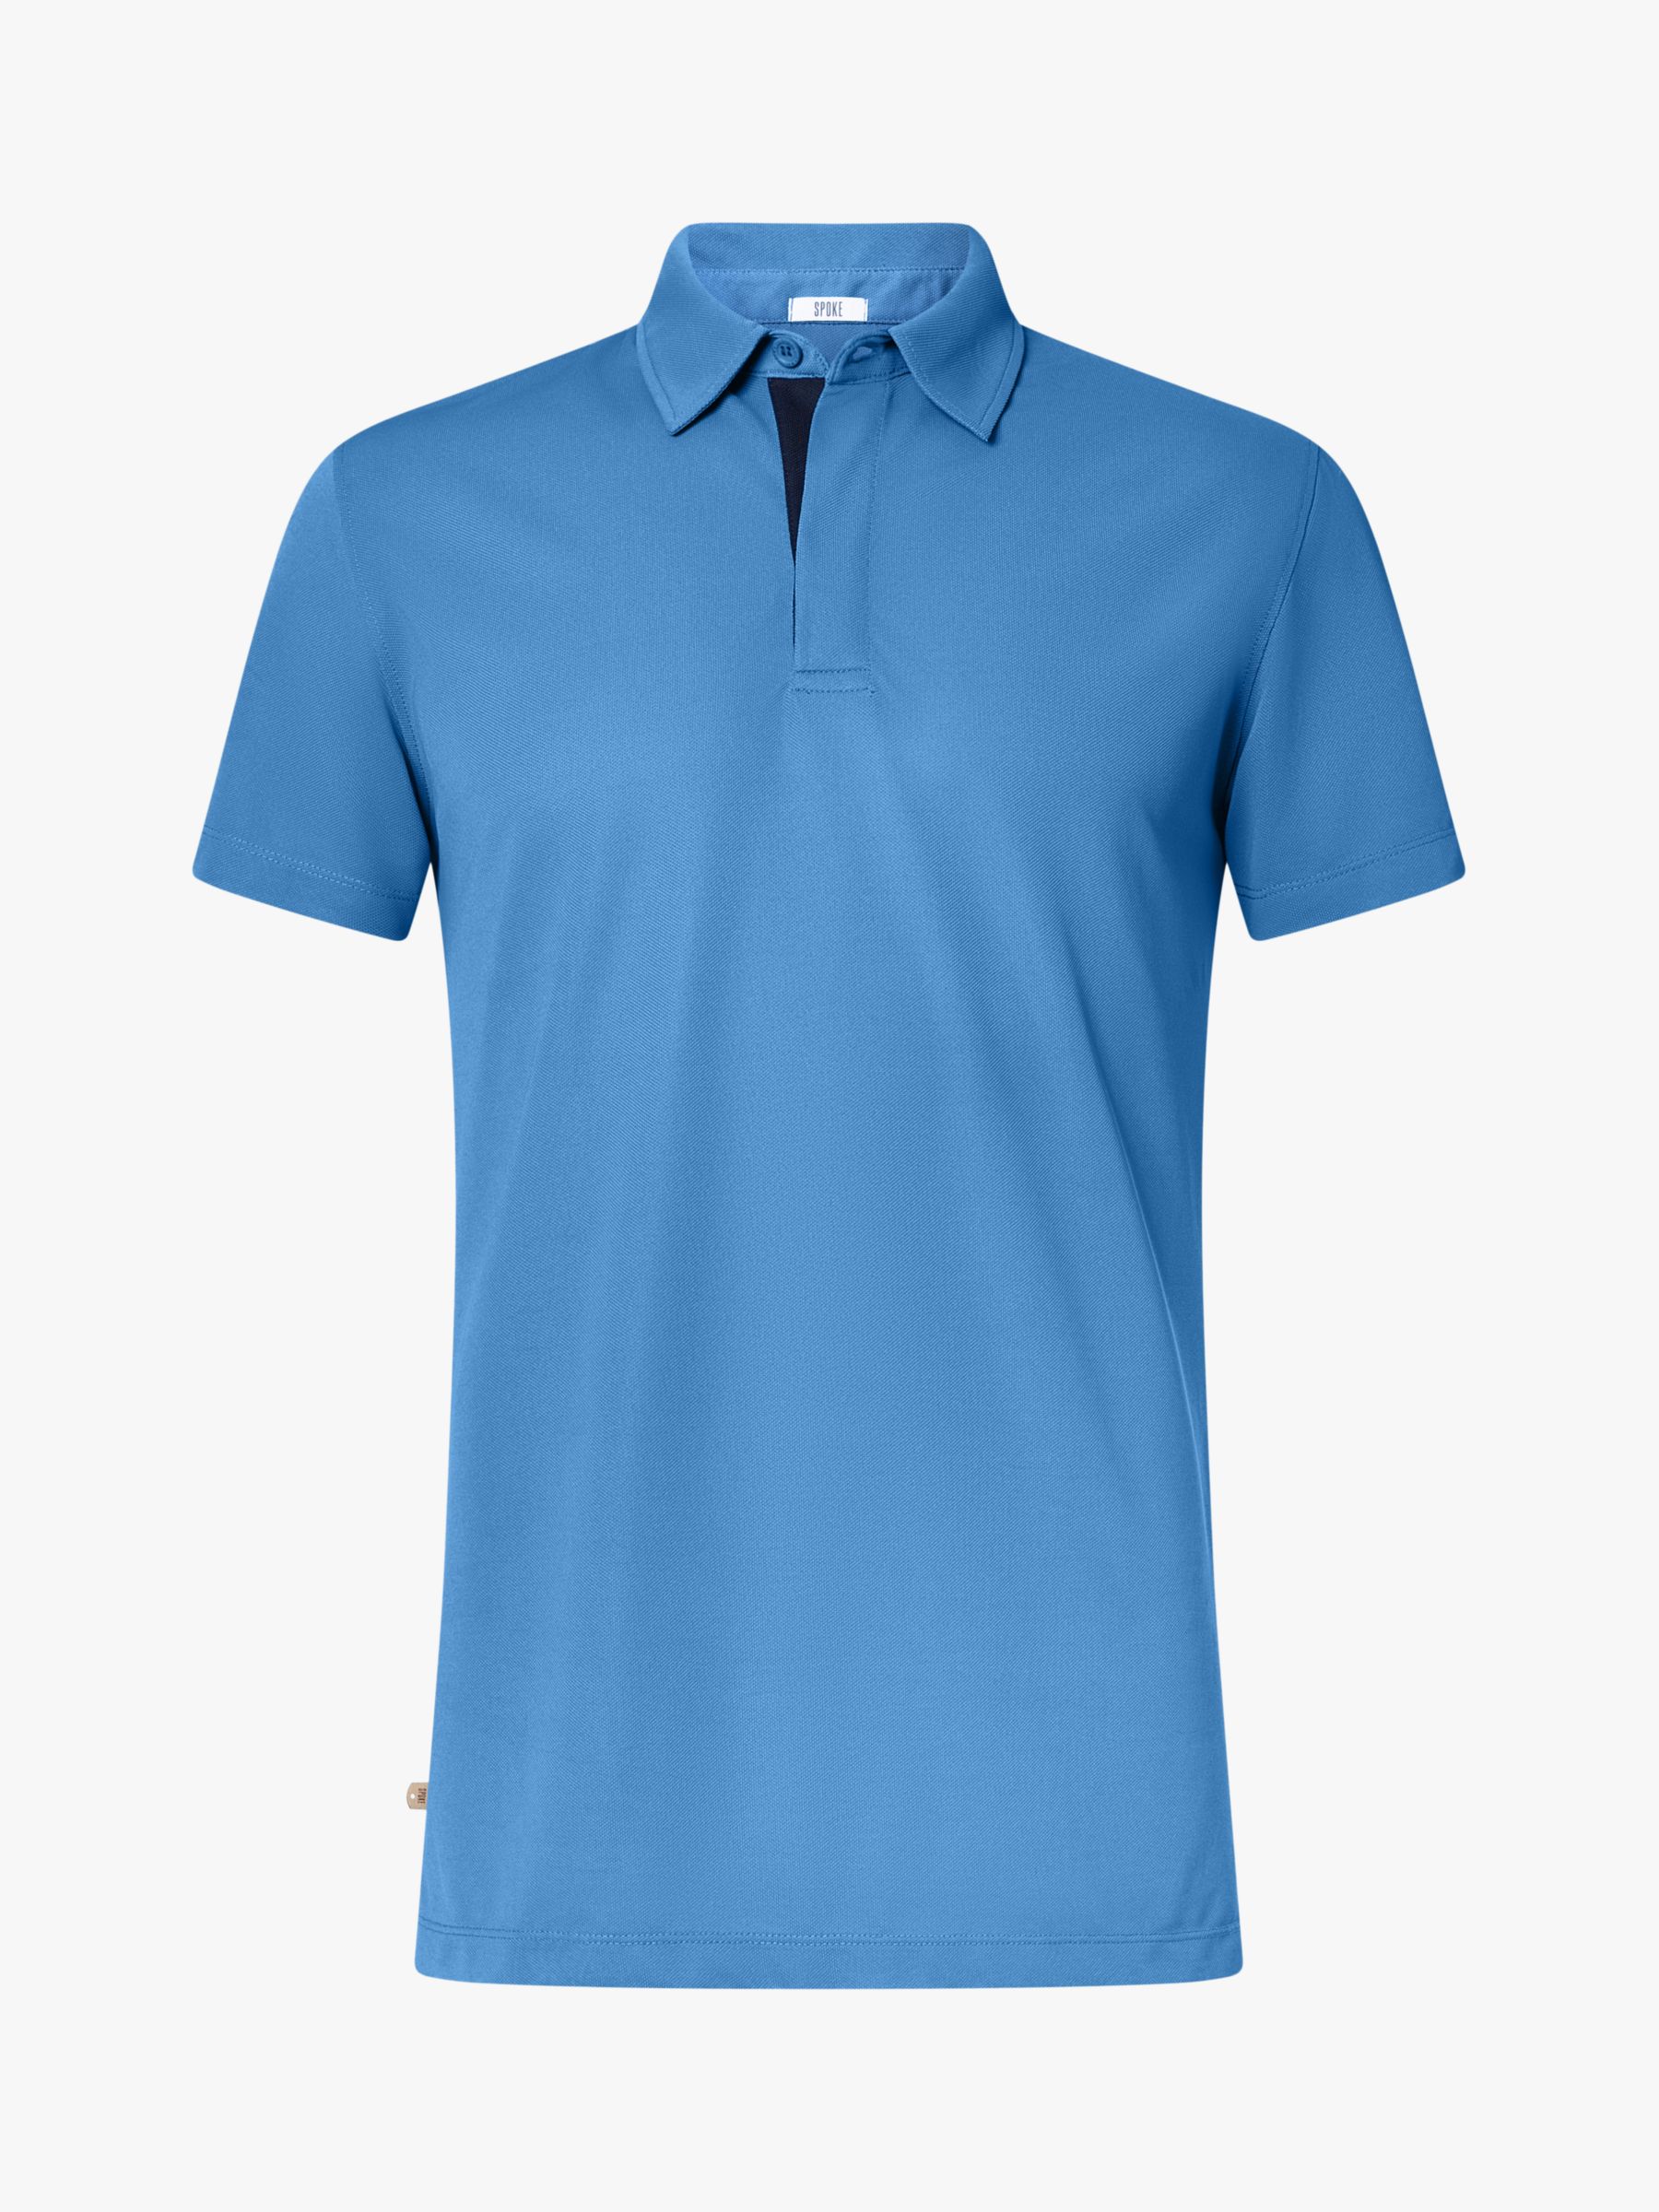 Buy SPOKE Condor Golf Straight Polo Top Online at johnlewis.com